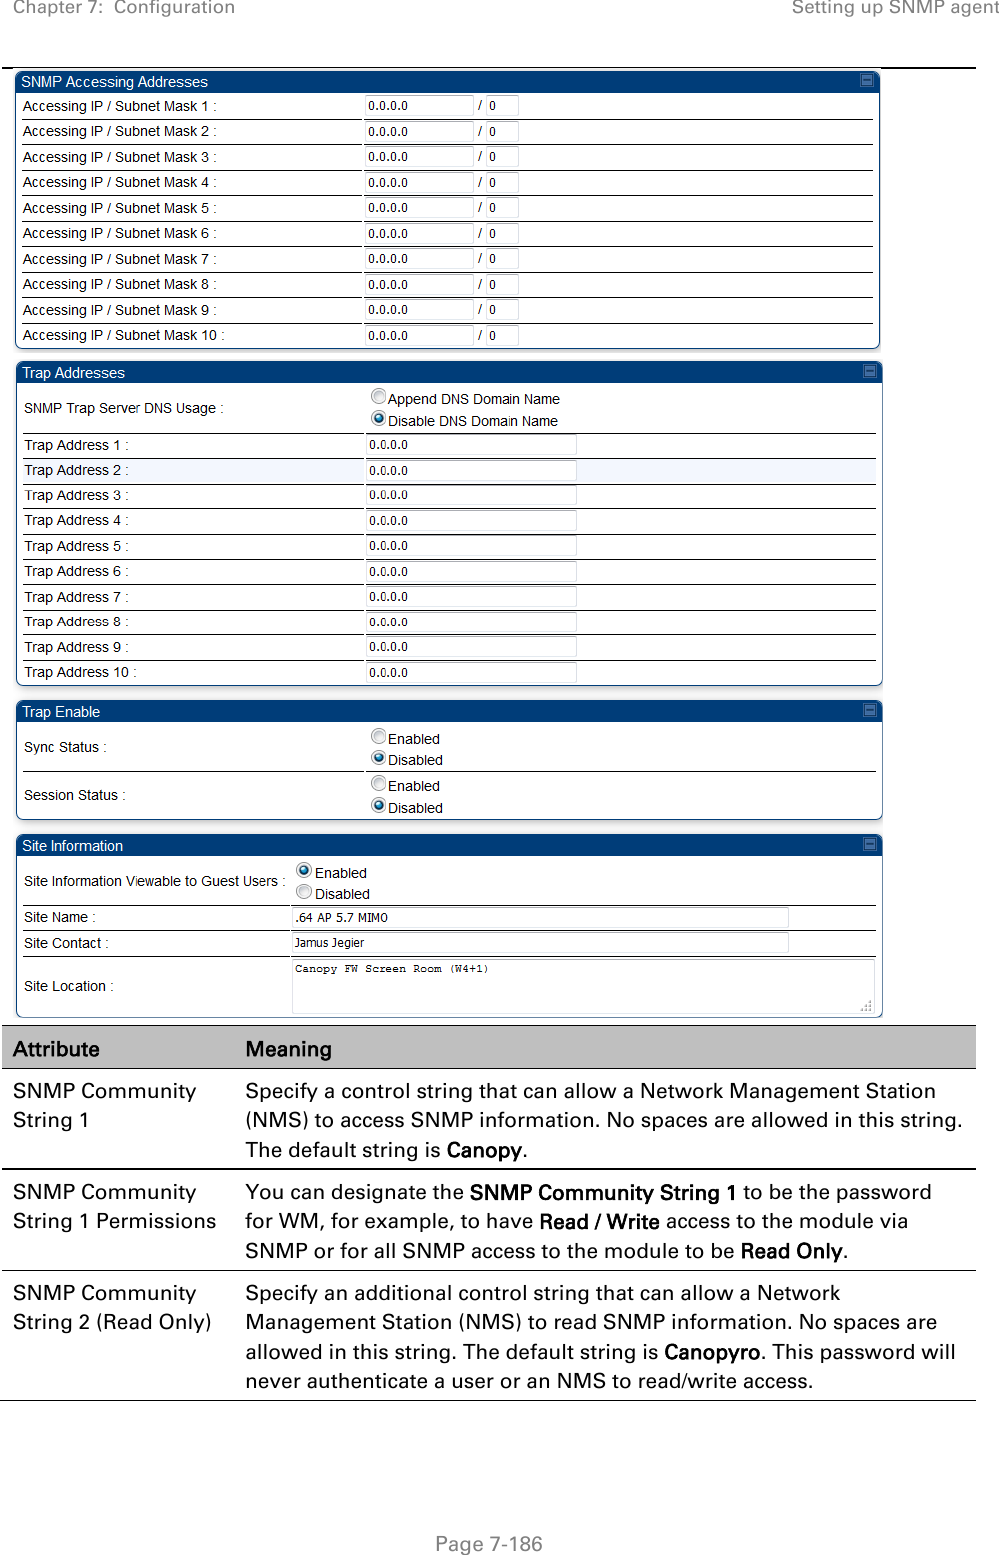 Chapter 7:  Configuration Setting up SNMP agent   Page 7-186   Attribute Meaning SNMP Community String 1 Specify a control string that can allow a Network Management Station (NMS) to access SNMP information. No spaces are allowed in this string. The default string is Canopy.  SNMP Community String 1 Permissions You can designate the SNMP Community String 1 to be the password for WM, for example, to have Read / Write access to the module via SNMP or for all SNMP access to the module to be Read Only. SNMP Community String 2 (Read Only) Specify an additional control string that can allow a Network Management Station (NMS) to read SNMP information. No spaces are allowed in this string. The default string is Canopyro. This password will never authenticate a user or an NMS to read/write access. 